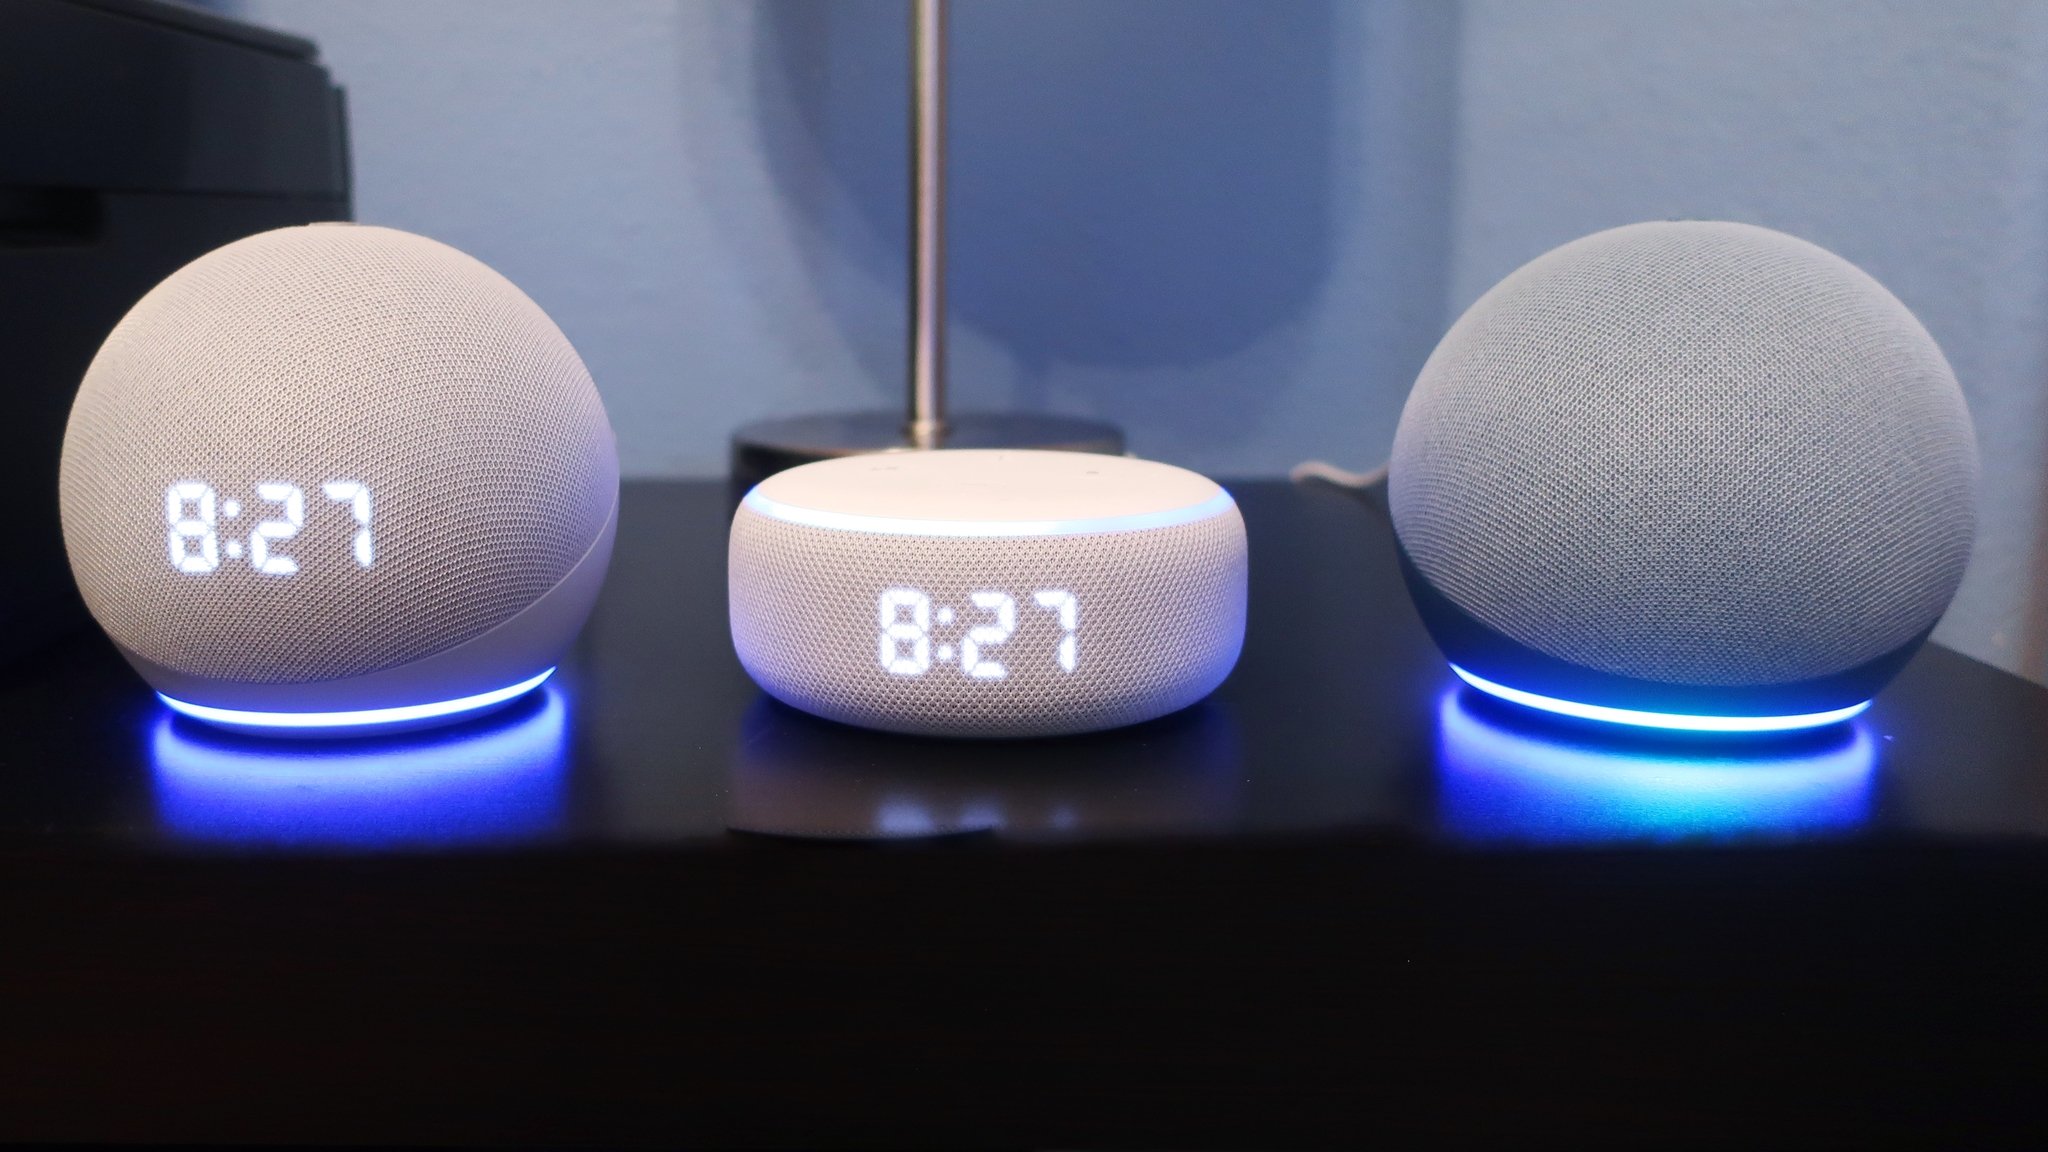 How To Change The Clock Brightness On Echo Dot